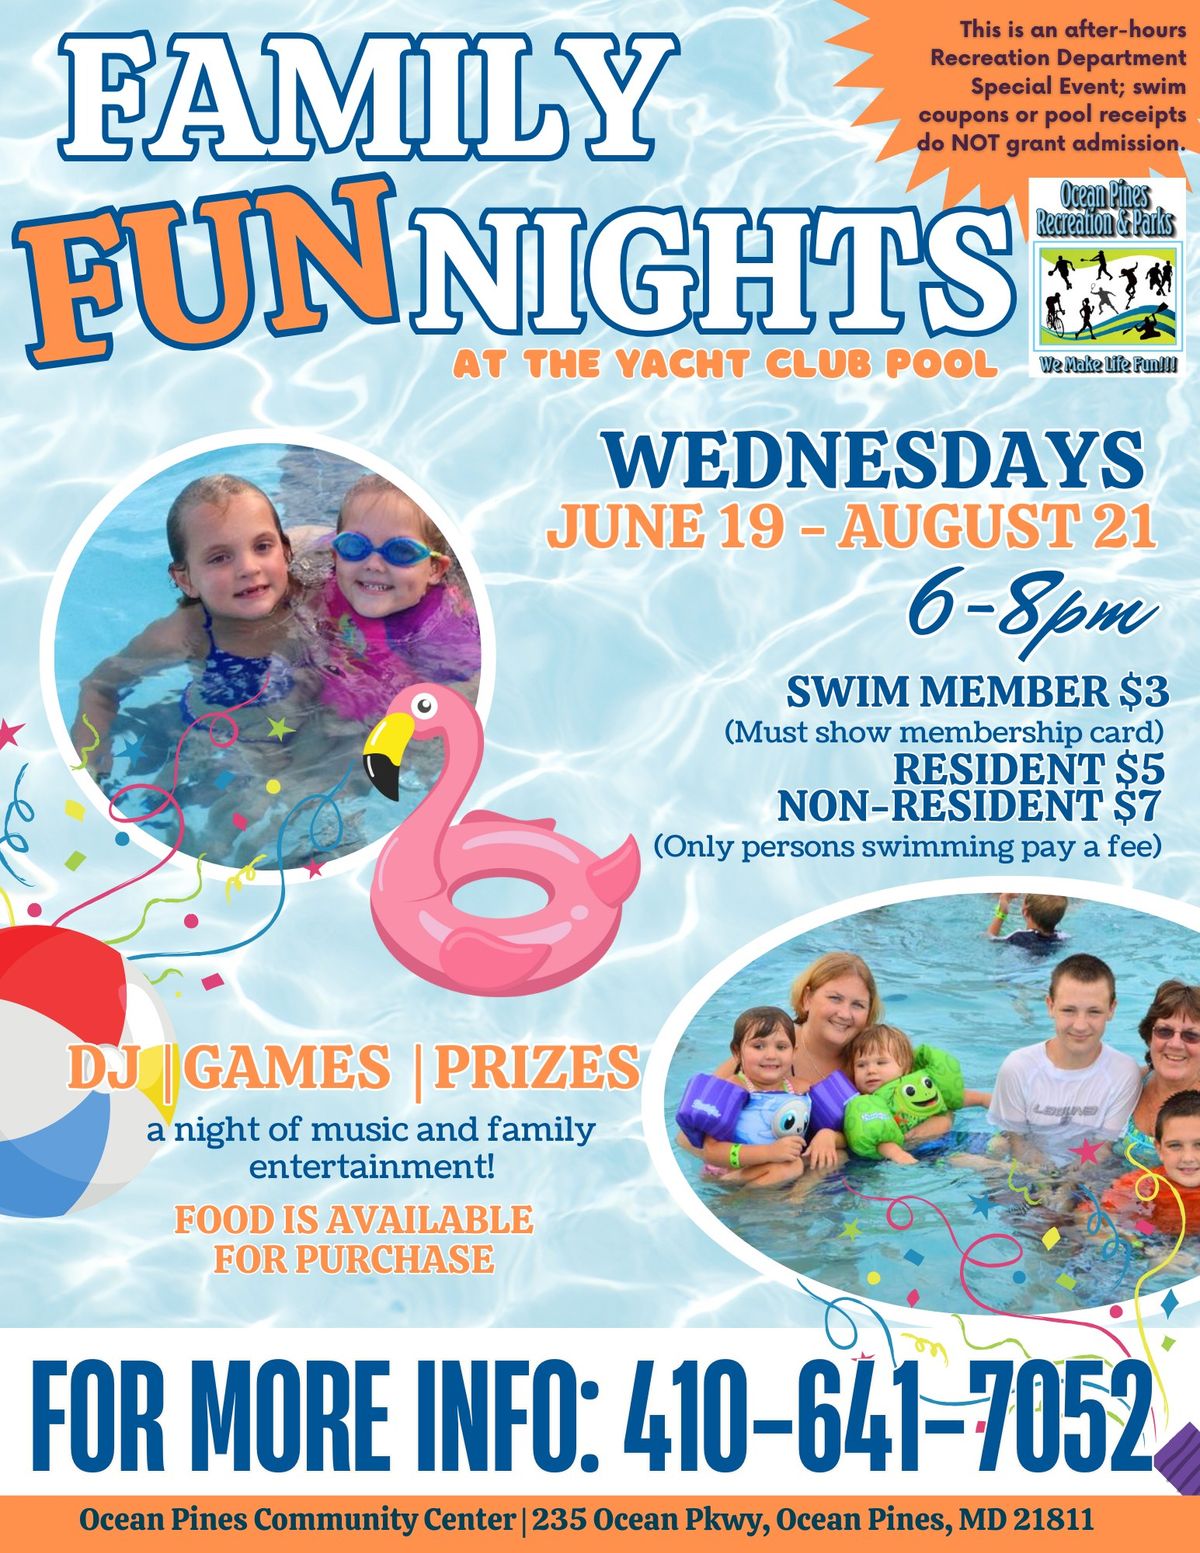 Wednesdays Family Fun Nights at the Yacht Club Pool